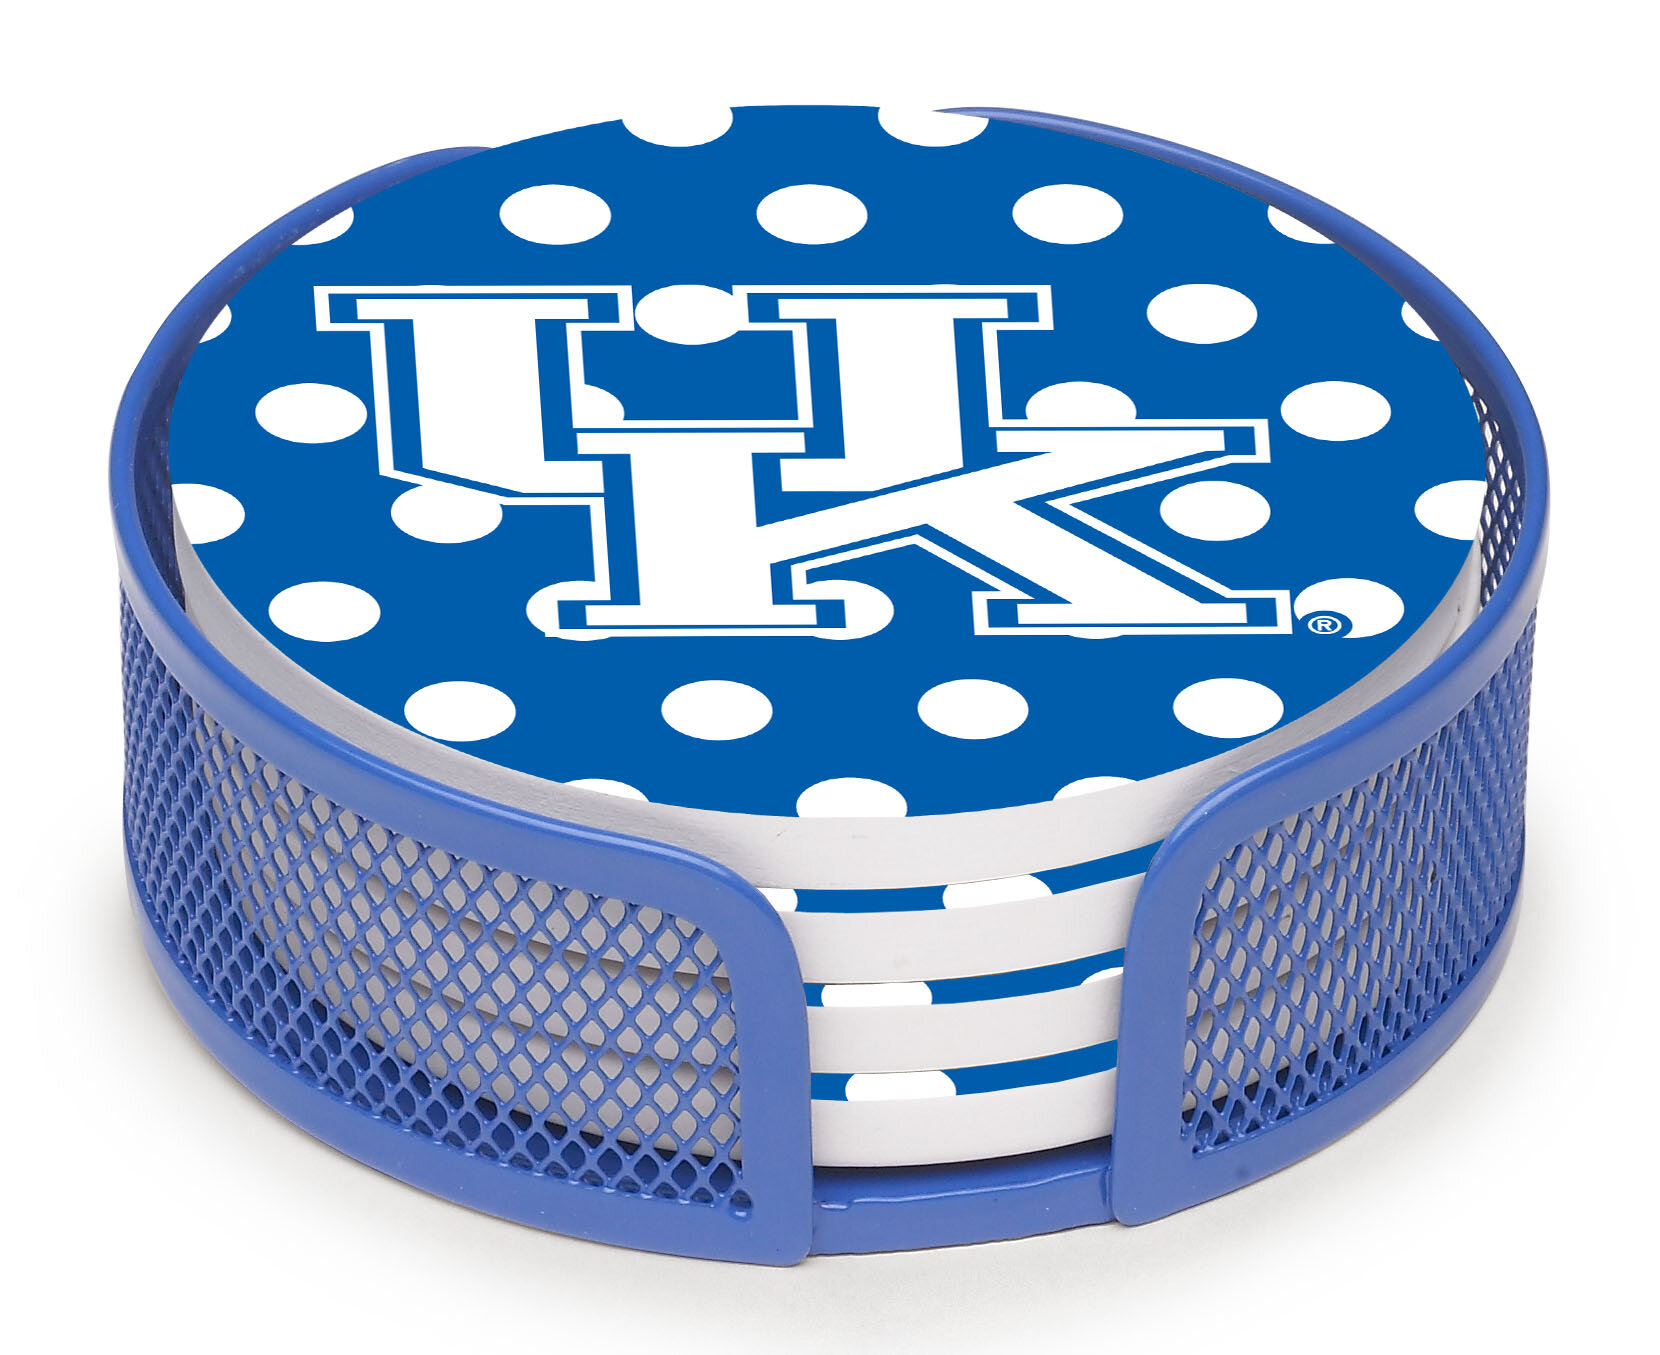 University of Kentucky Color Logo 4 x 4 Absorbent Ceramic Coasters Pack of 4 